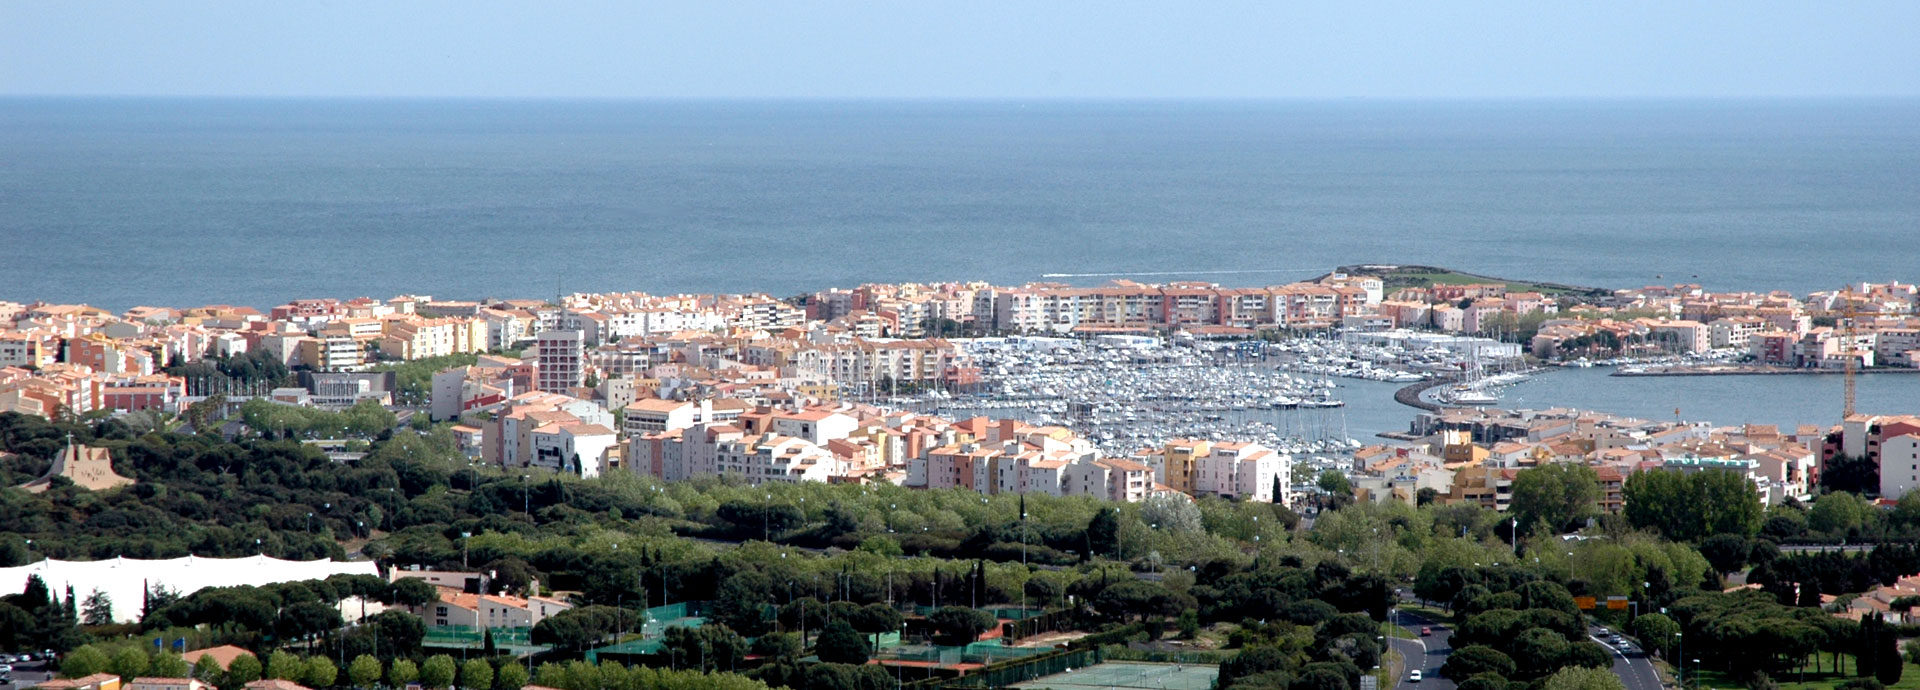 Le Cap d'Agde in Languedoc-Roussillon: affitto case vacanza nell'Hérault